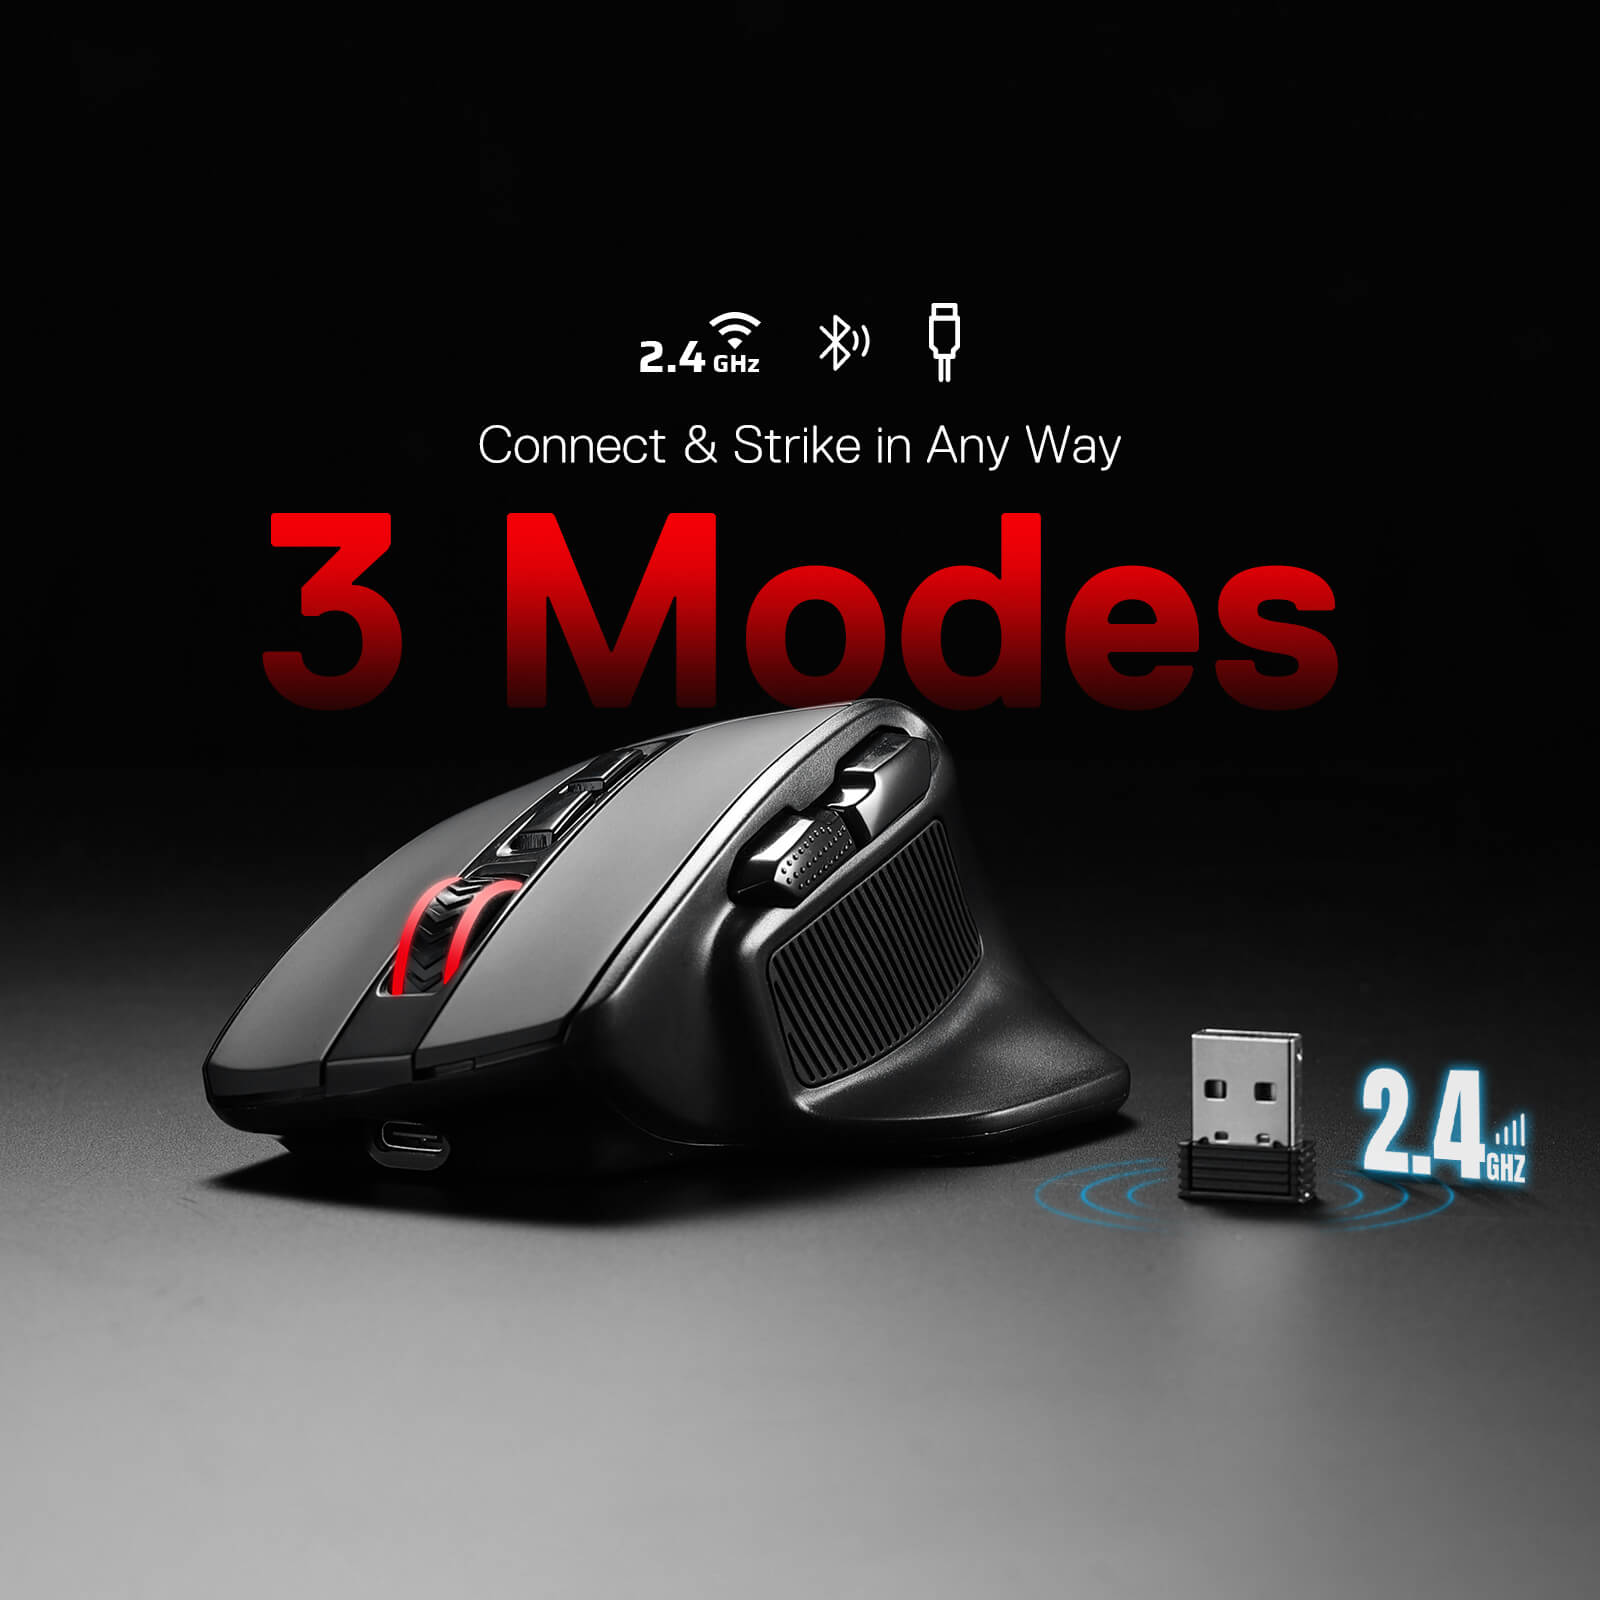 The CHEAPEST Pixart 3395 Gaming Mouse I've Seen and Tried